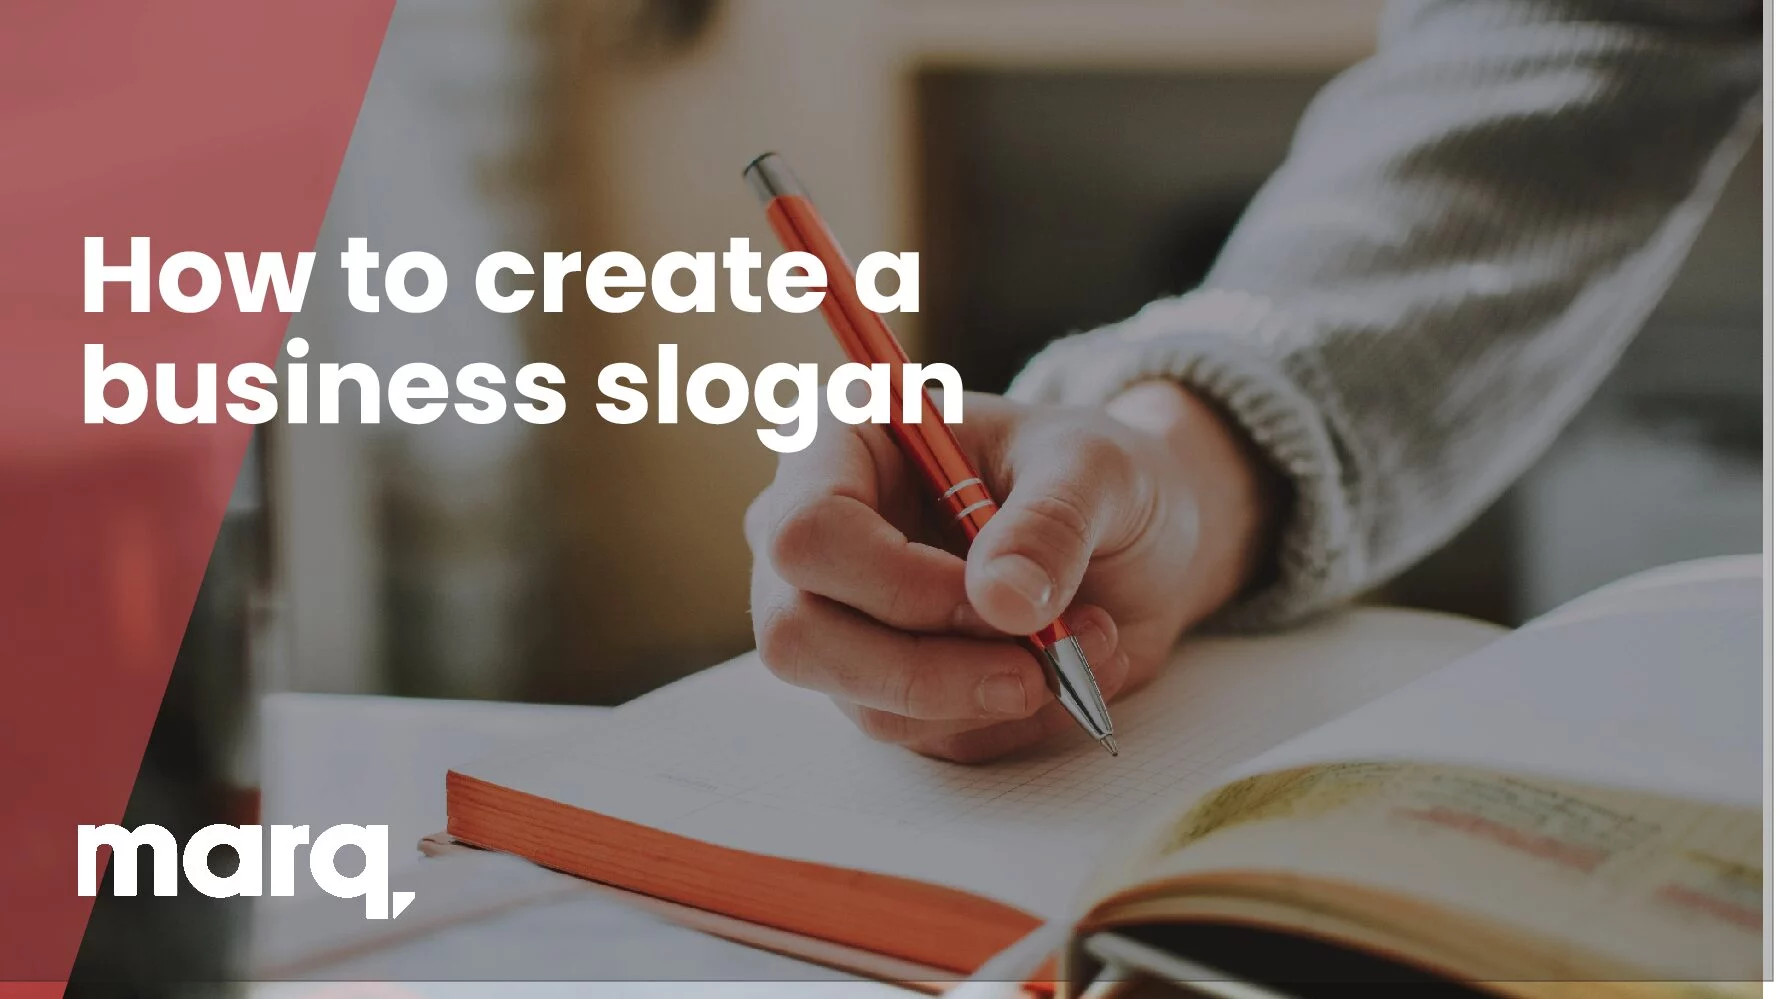 How to create a business slogan